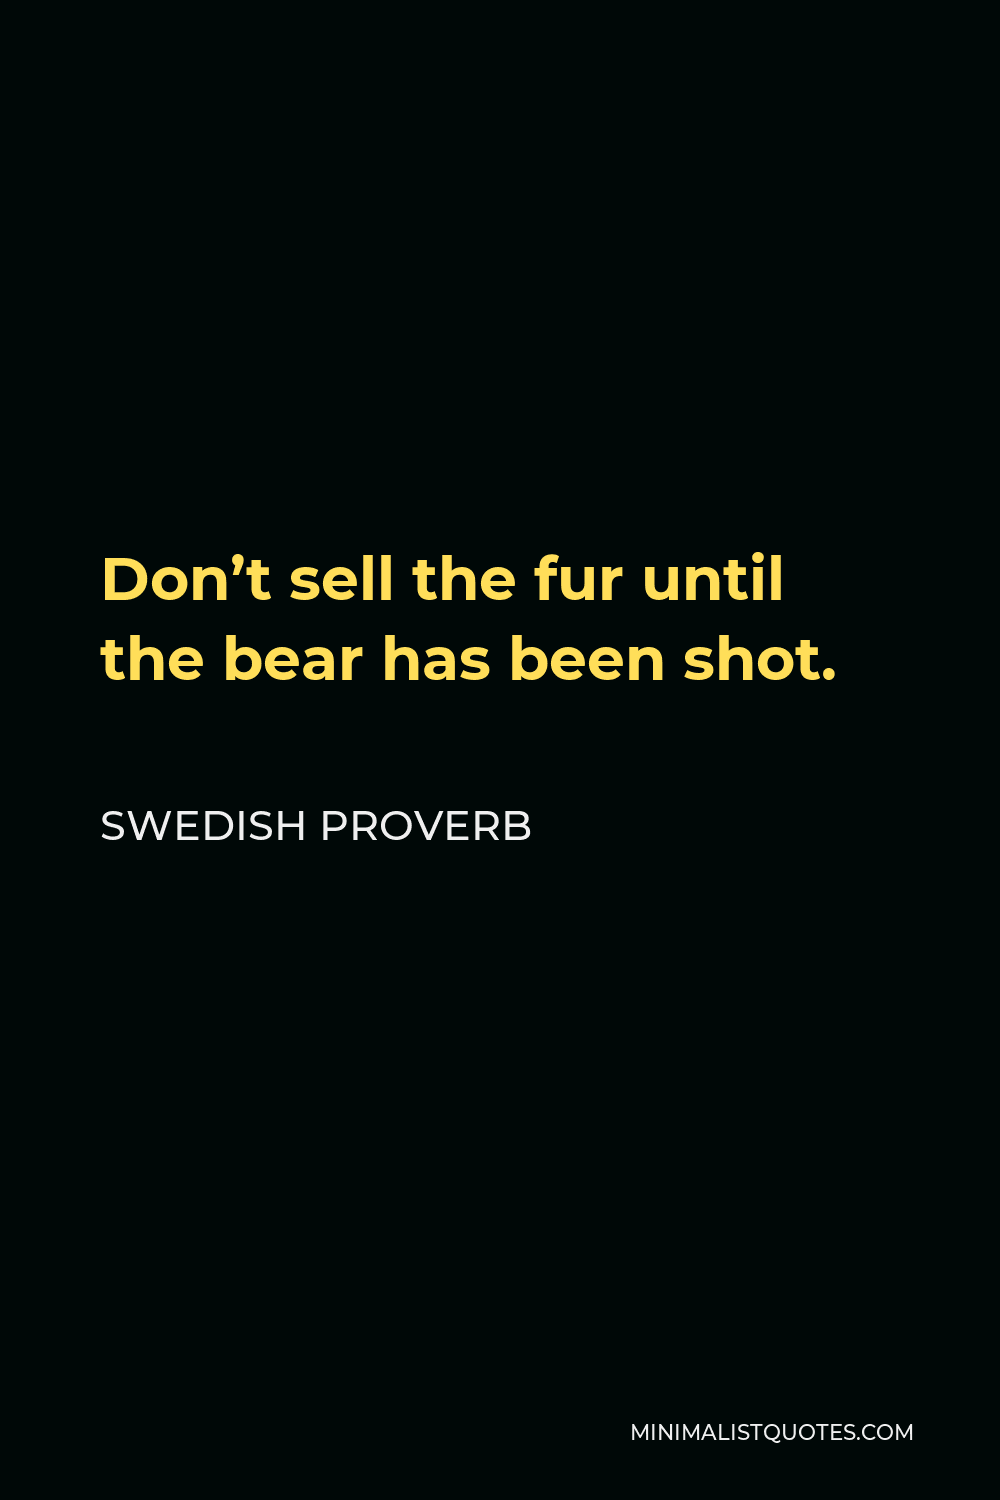 Swedish Proverb Quote - Don’t sell the fur until the bear has been shot.